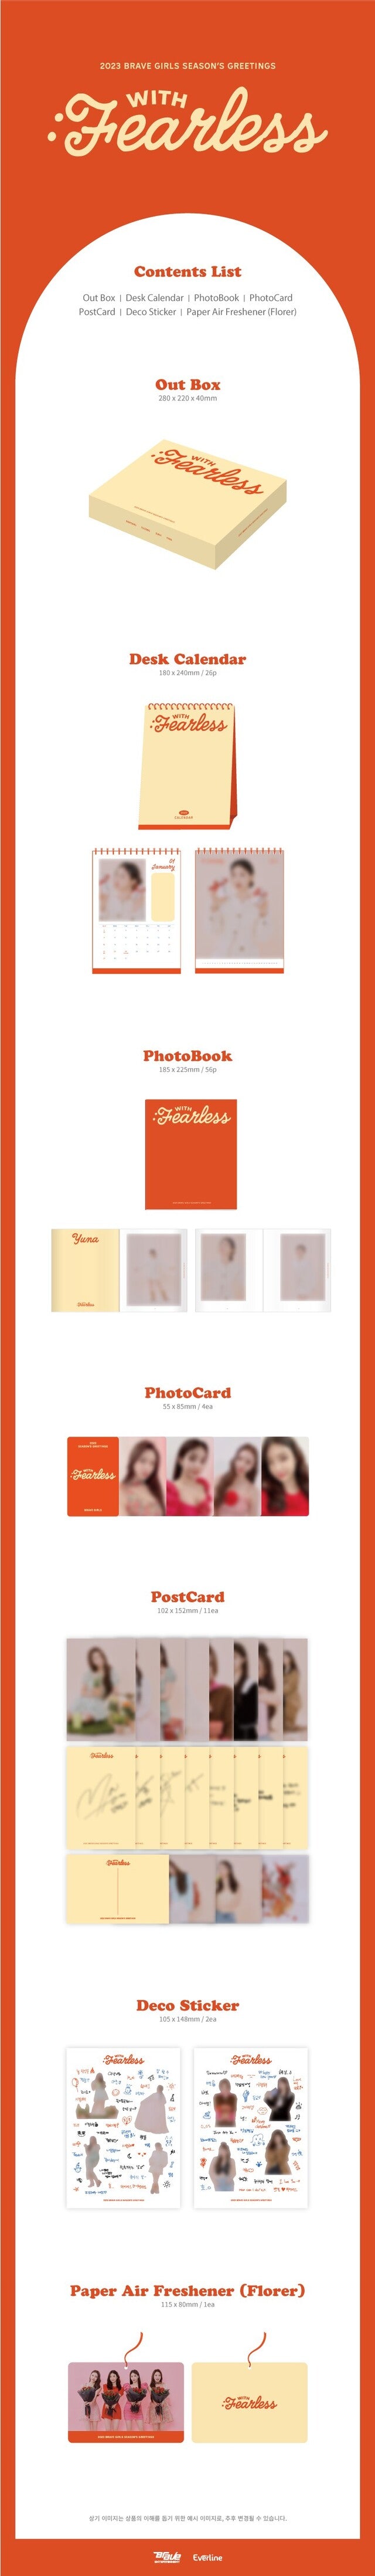 [PREORDER] BRAVE GIRLS  - 2023 SEASON'S GREETINGS WITH : Fearless